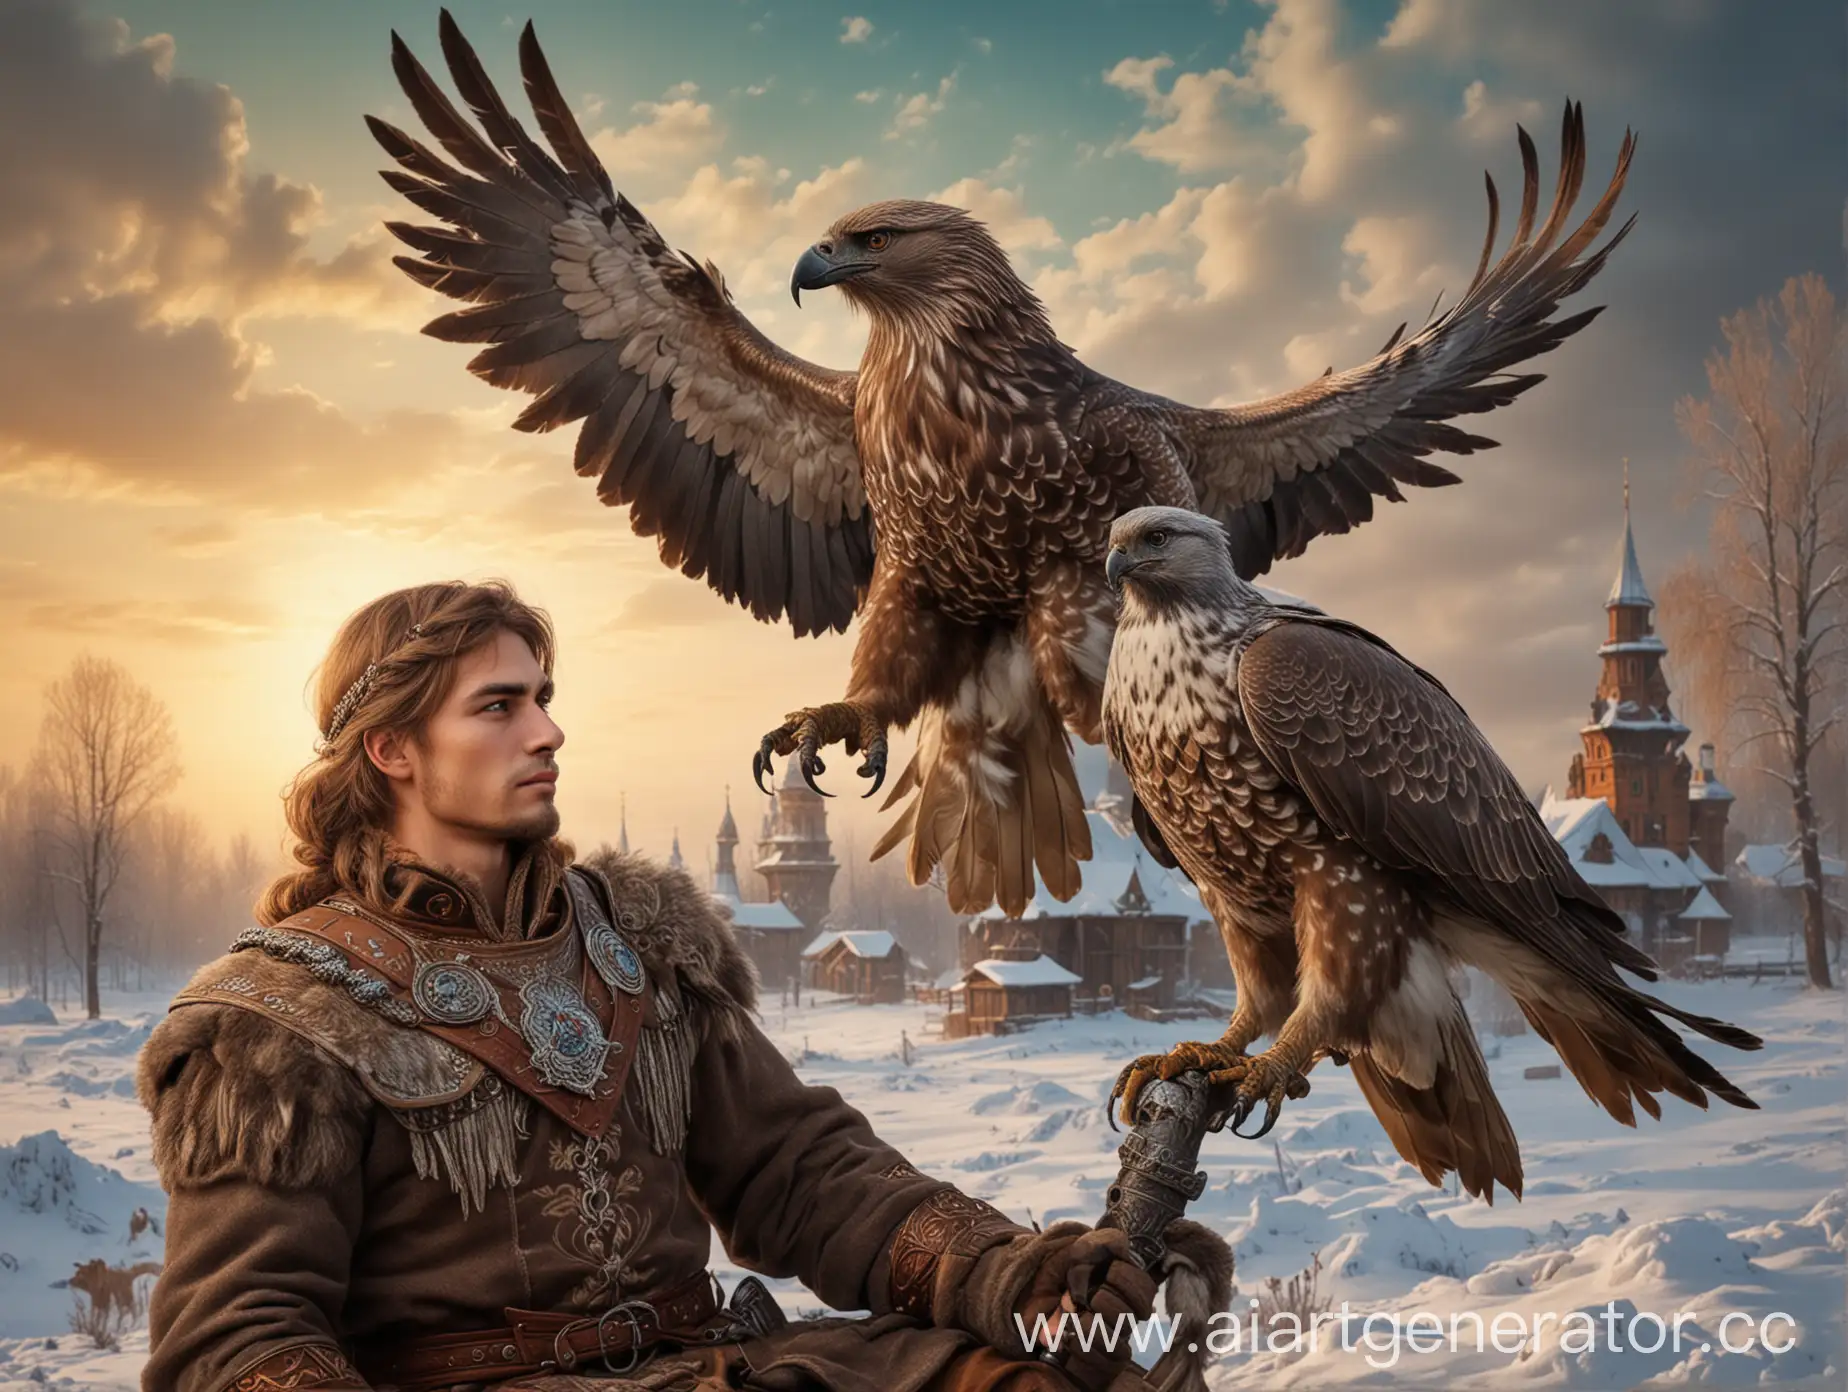 Russian-Bogatyr-with-Falcon-in-Fairy-Tale-Setting